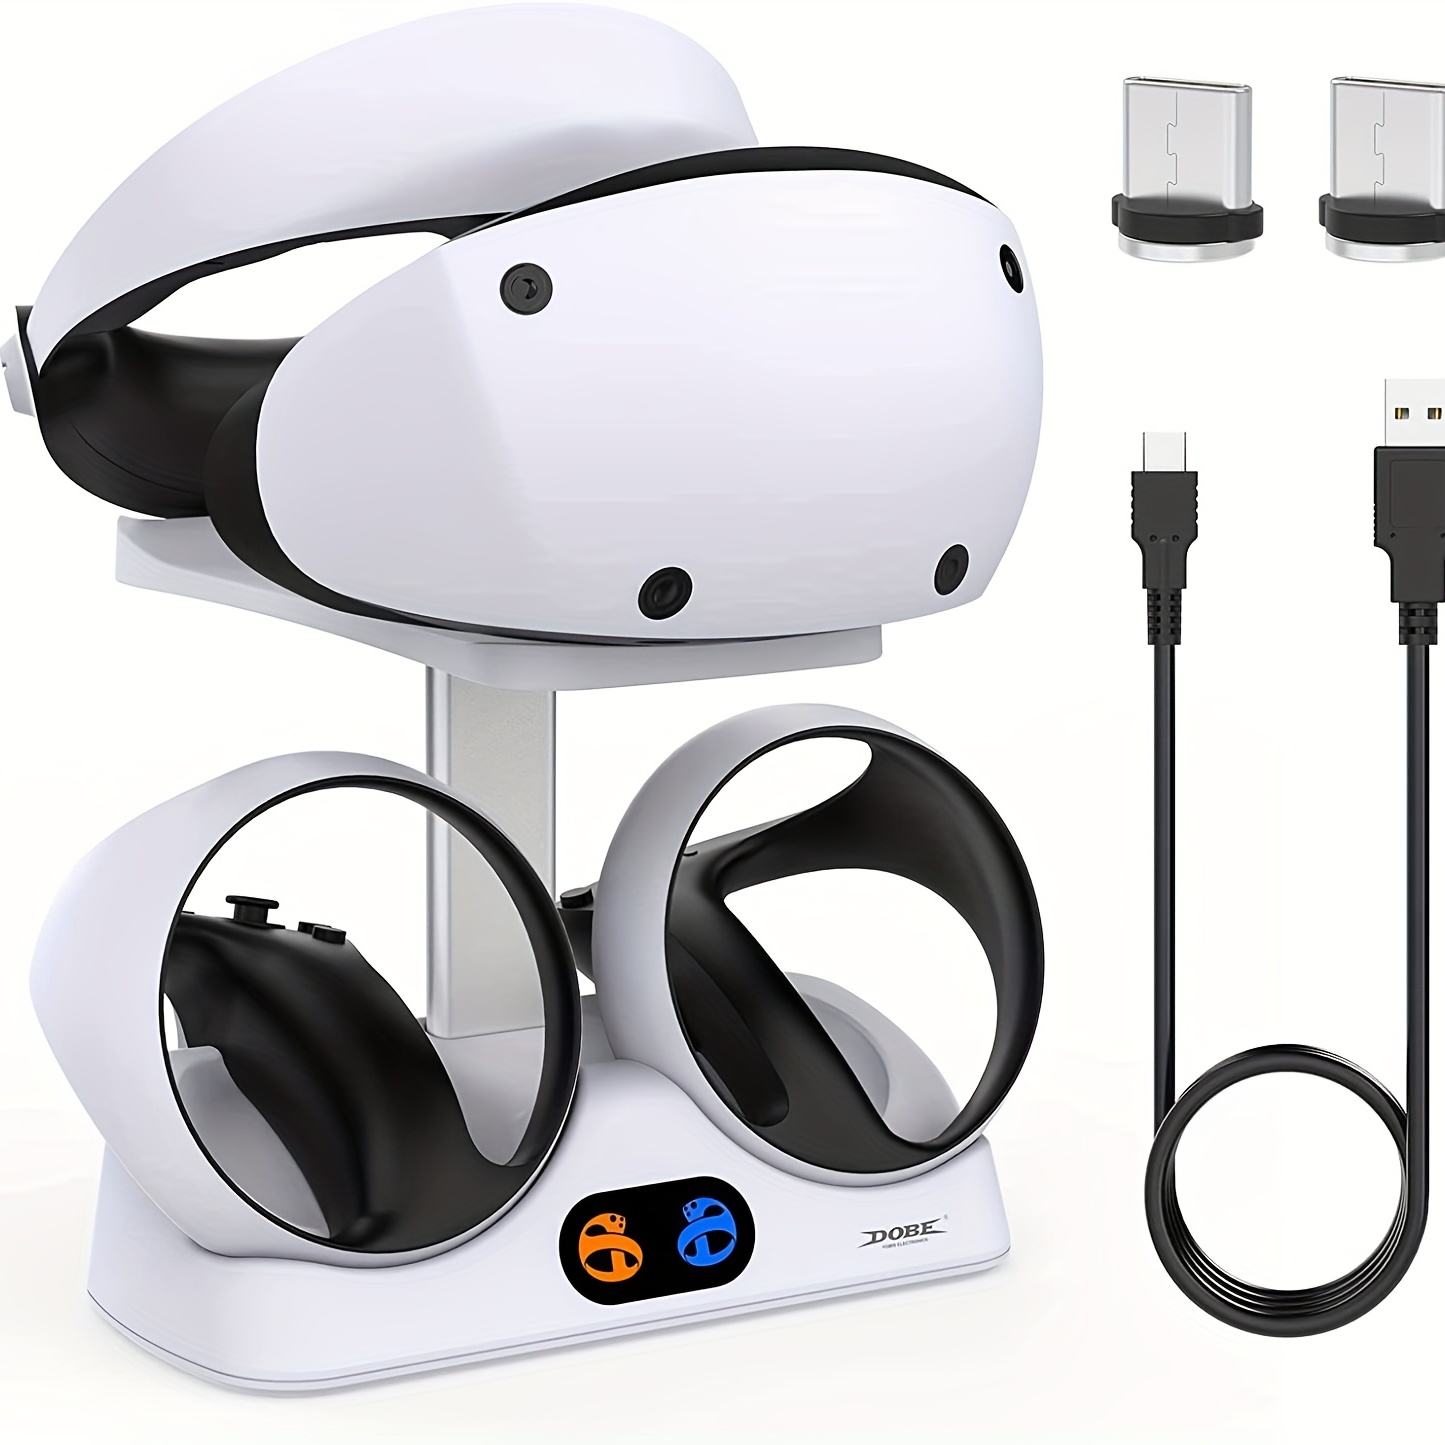 PlayStation PS VR2 Virtual Reality Headset & Sense Controllers